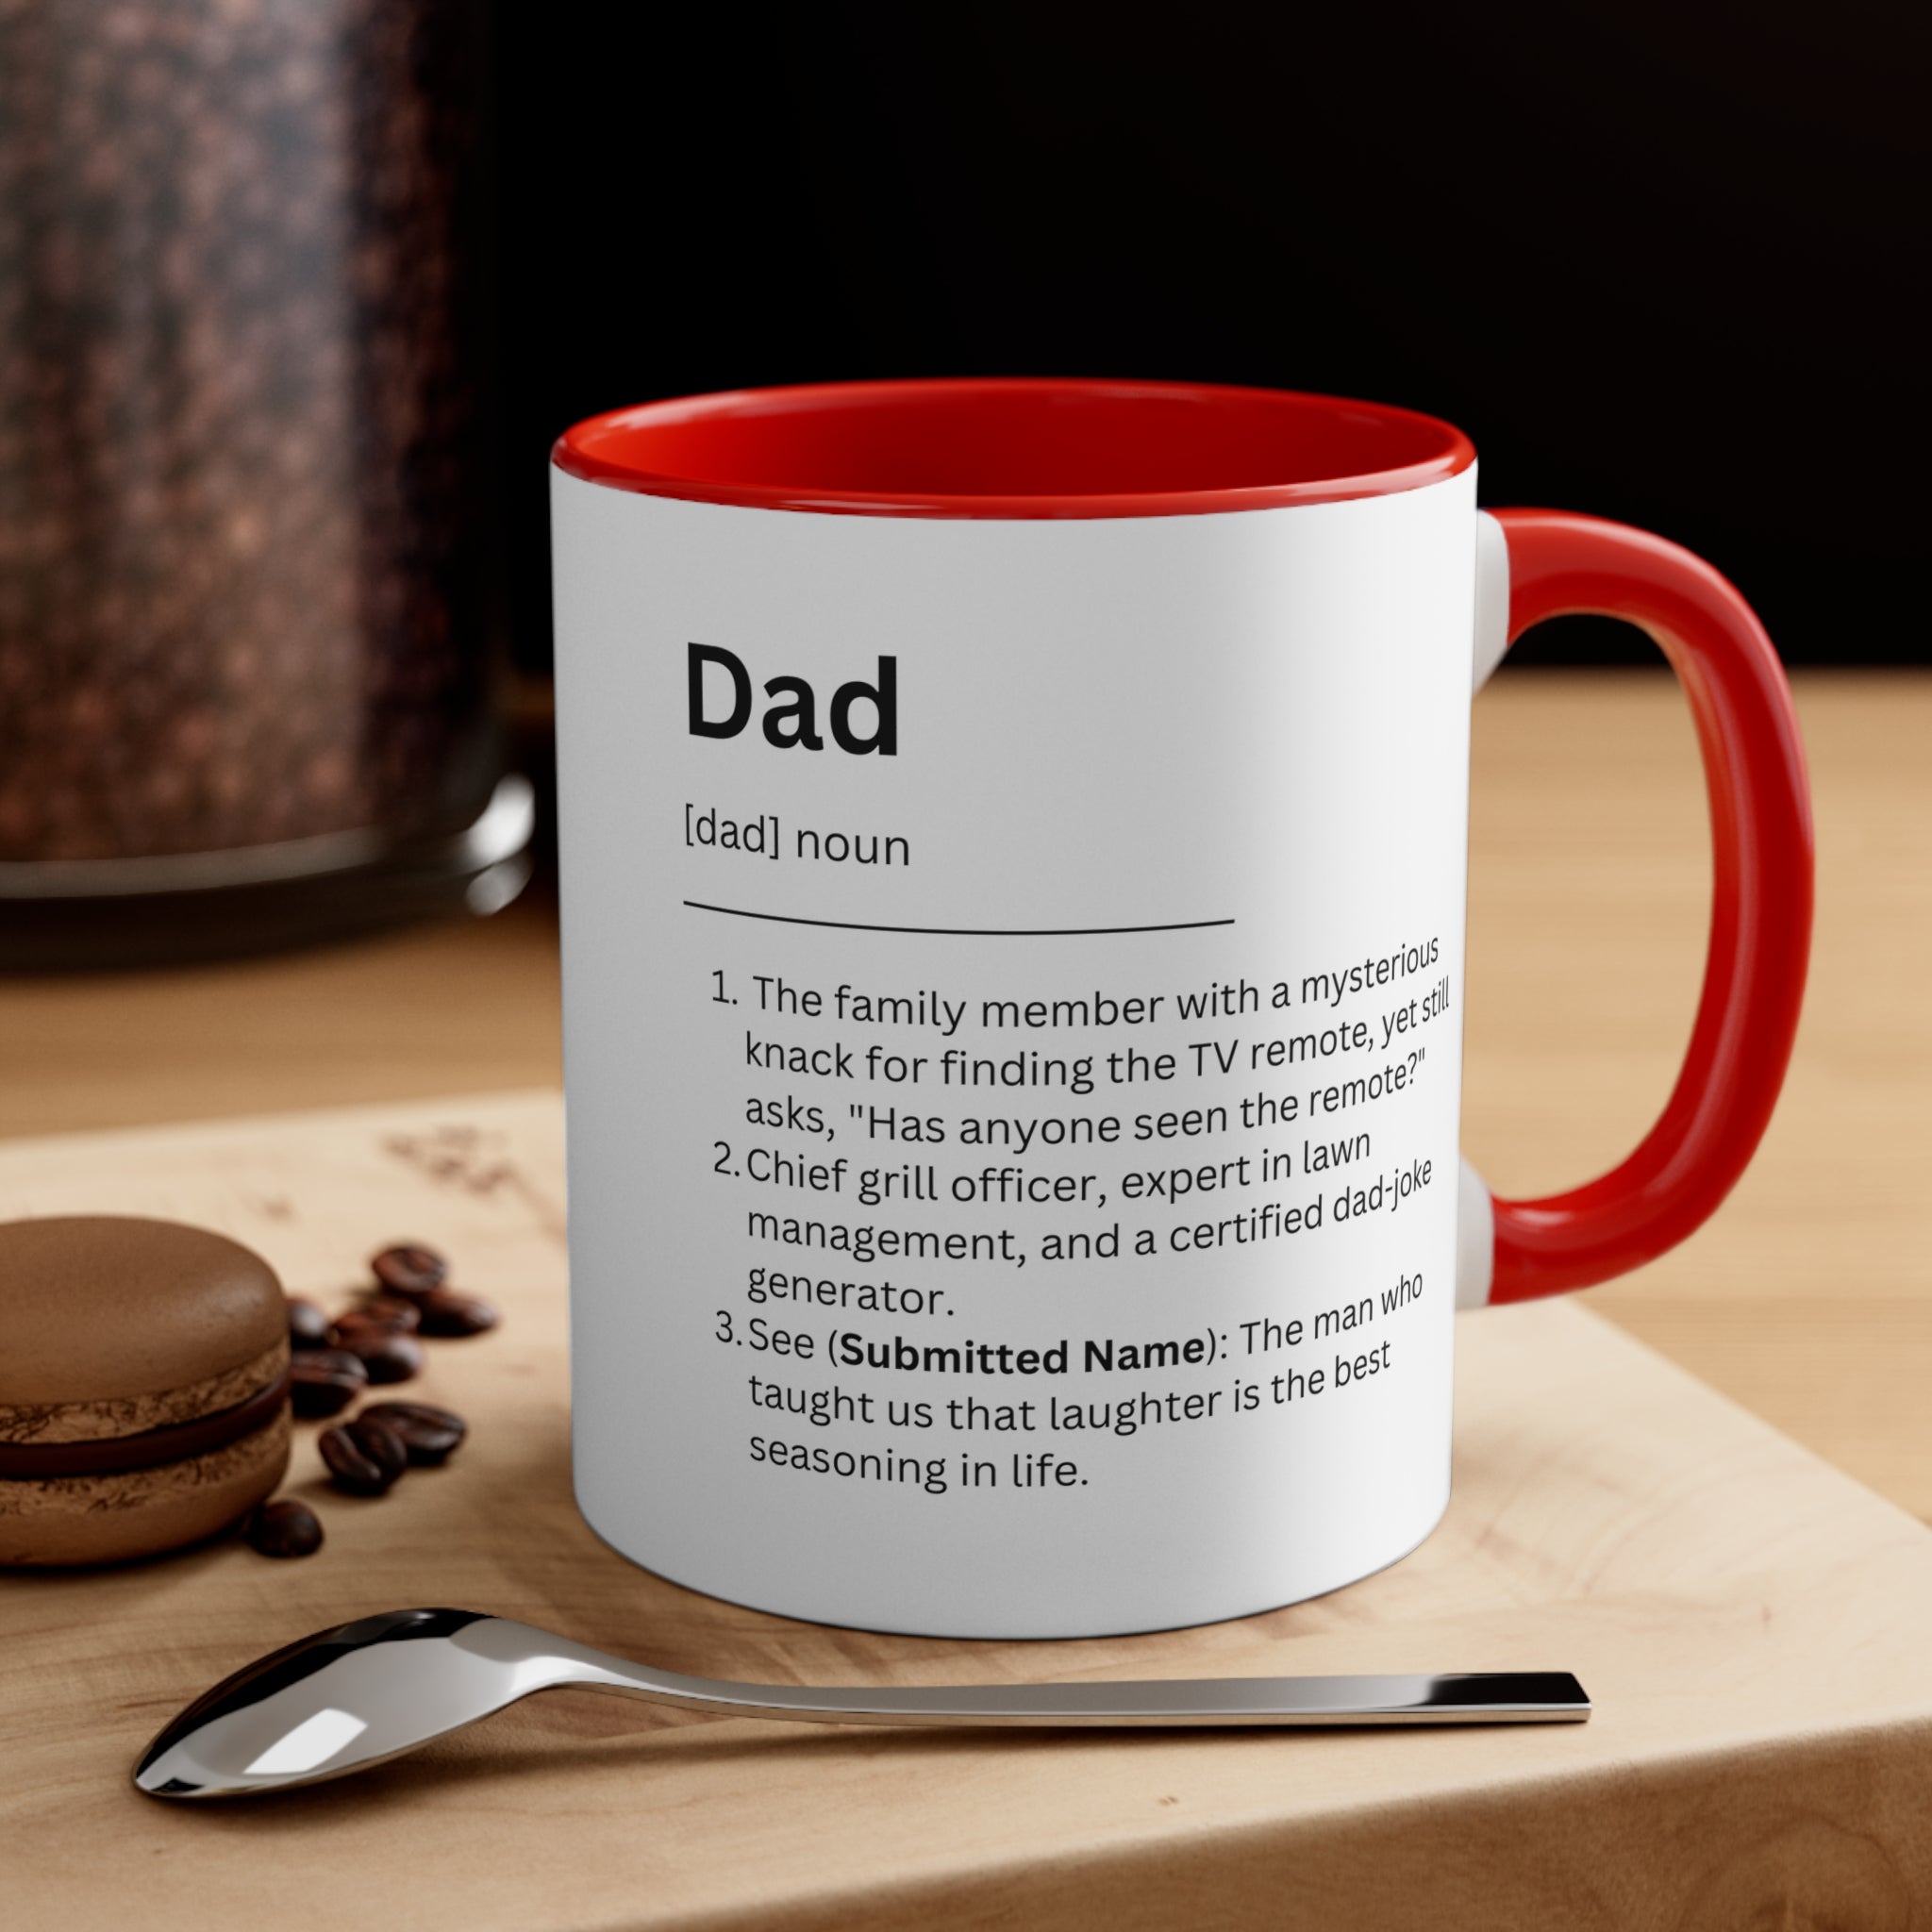 "Funny Dad Dictionary Definition Mug - Personalized Name Accent - 11oz Coffee Cup for Hilarious Dads Who Need to Relax and Laugh with Loved Ones